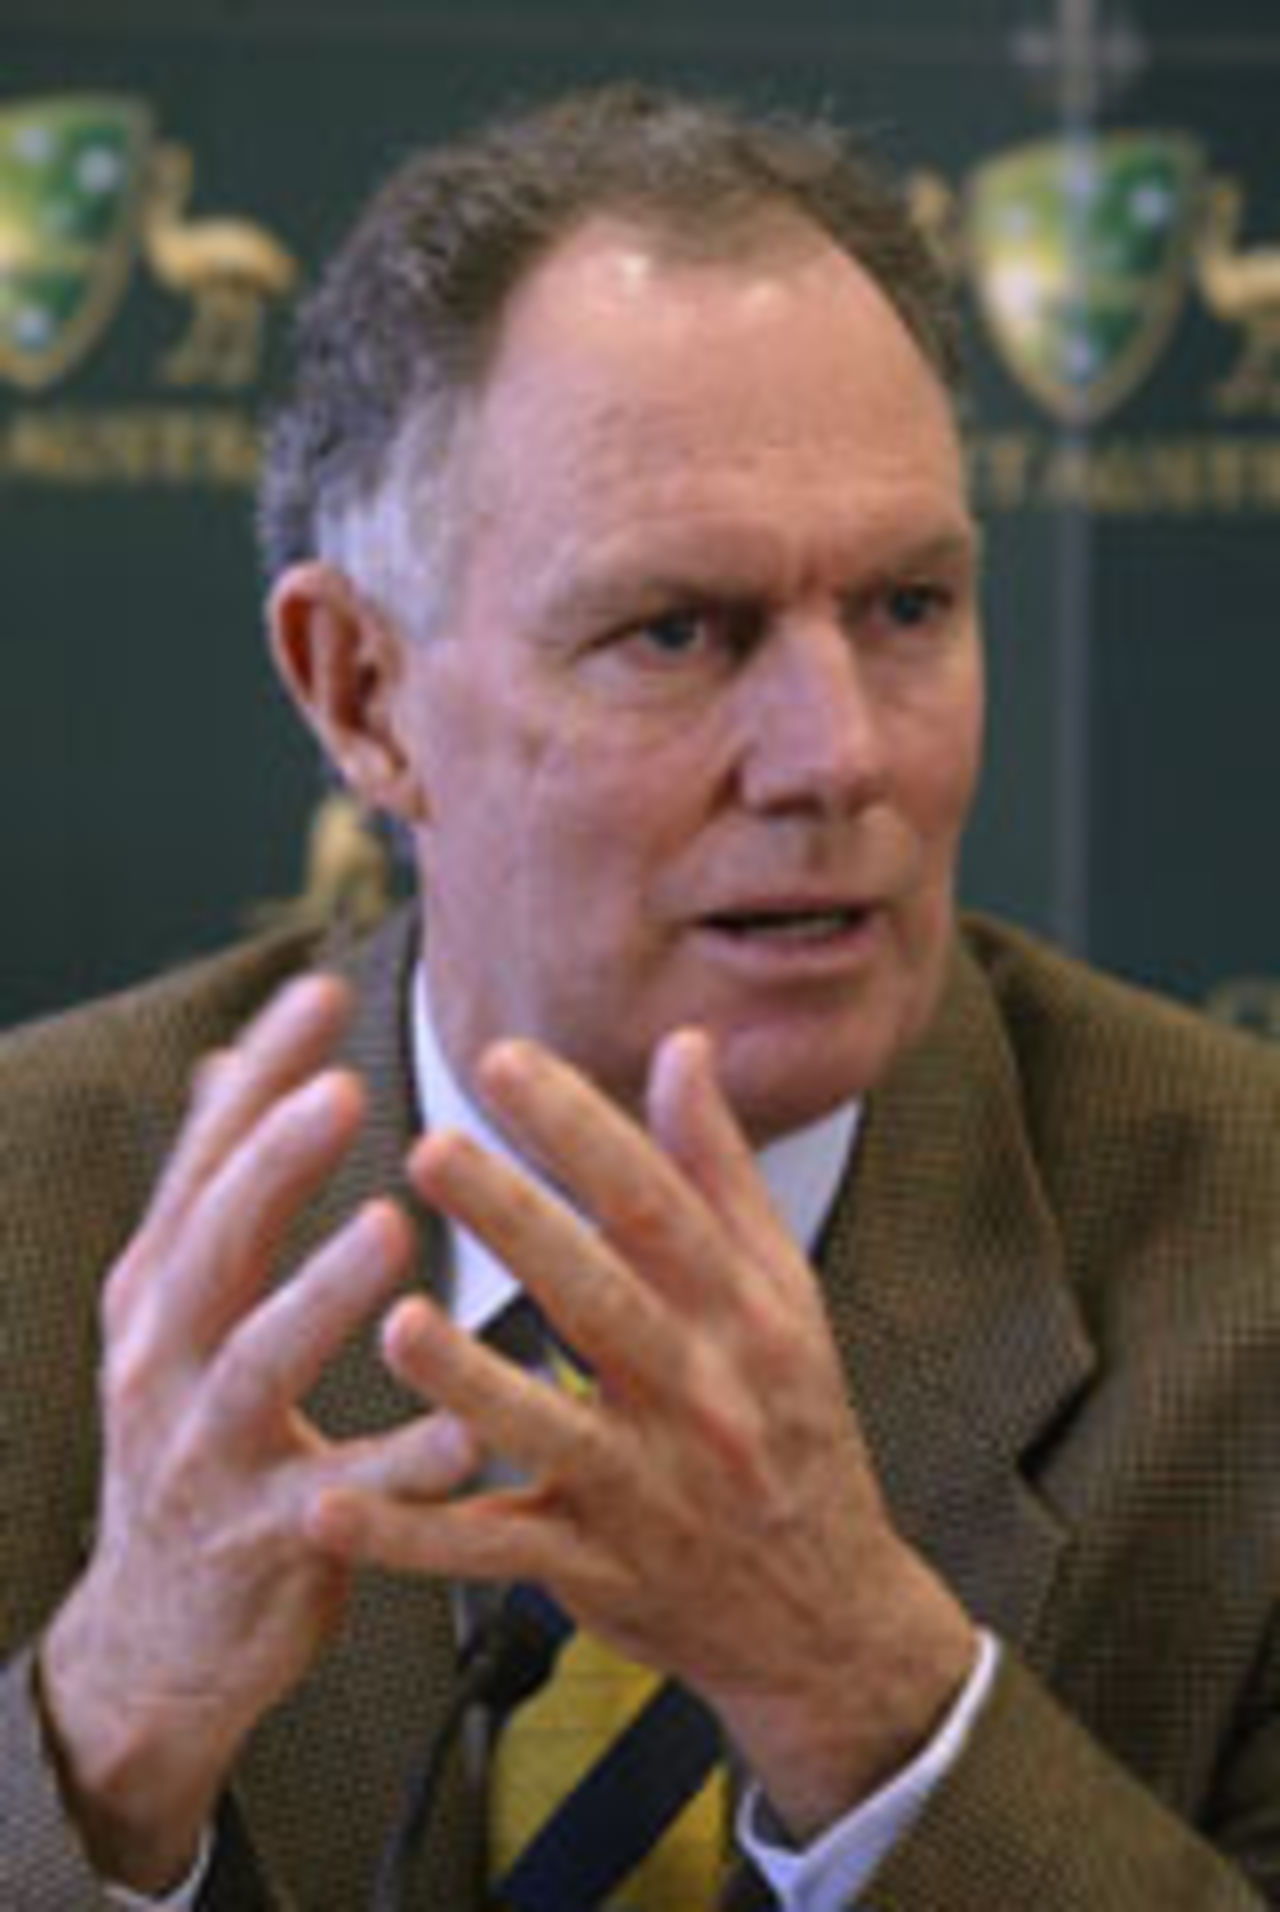 Greg Chappell at a press conference, Melbourne, May 19, 2004